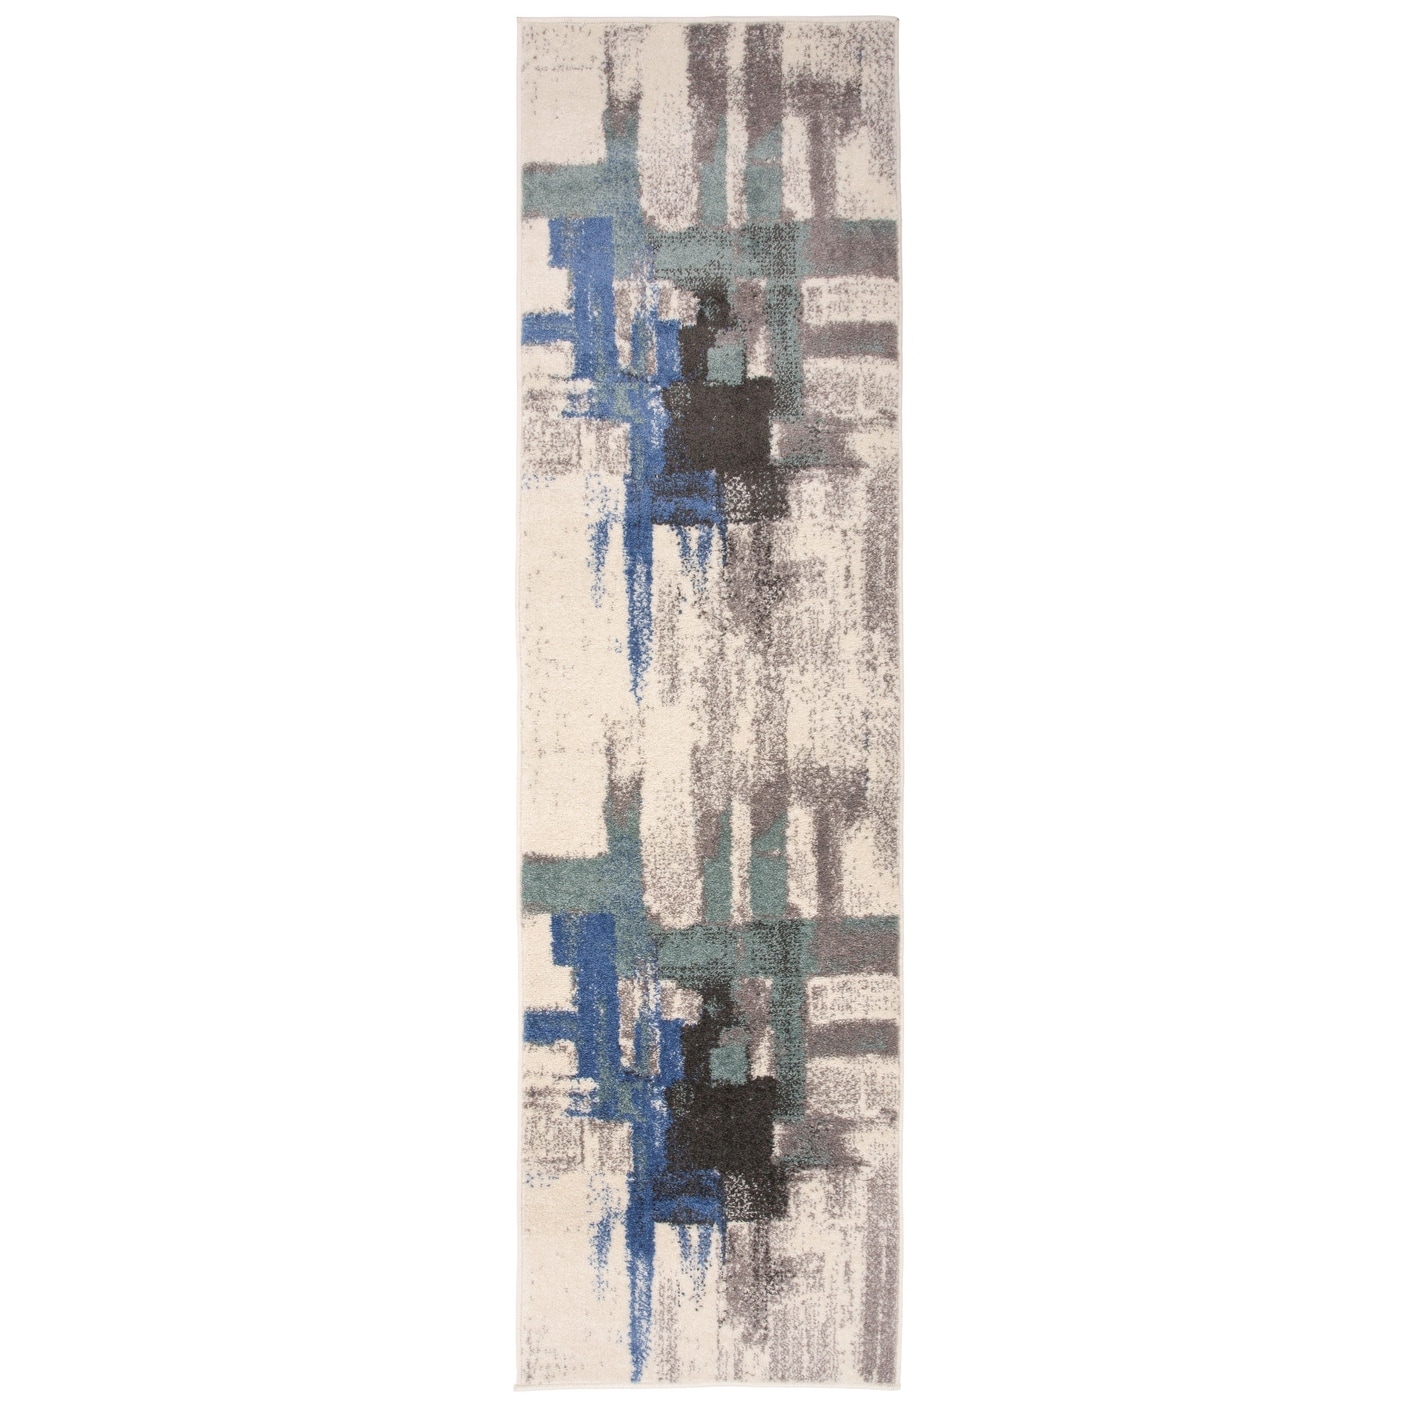 7'8 X10' HR Blue/Grey/Silver/Black/Abstract Contemporary Modern Design Brushed Colors Area Rug